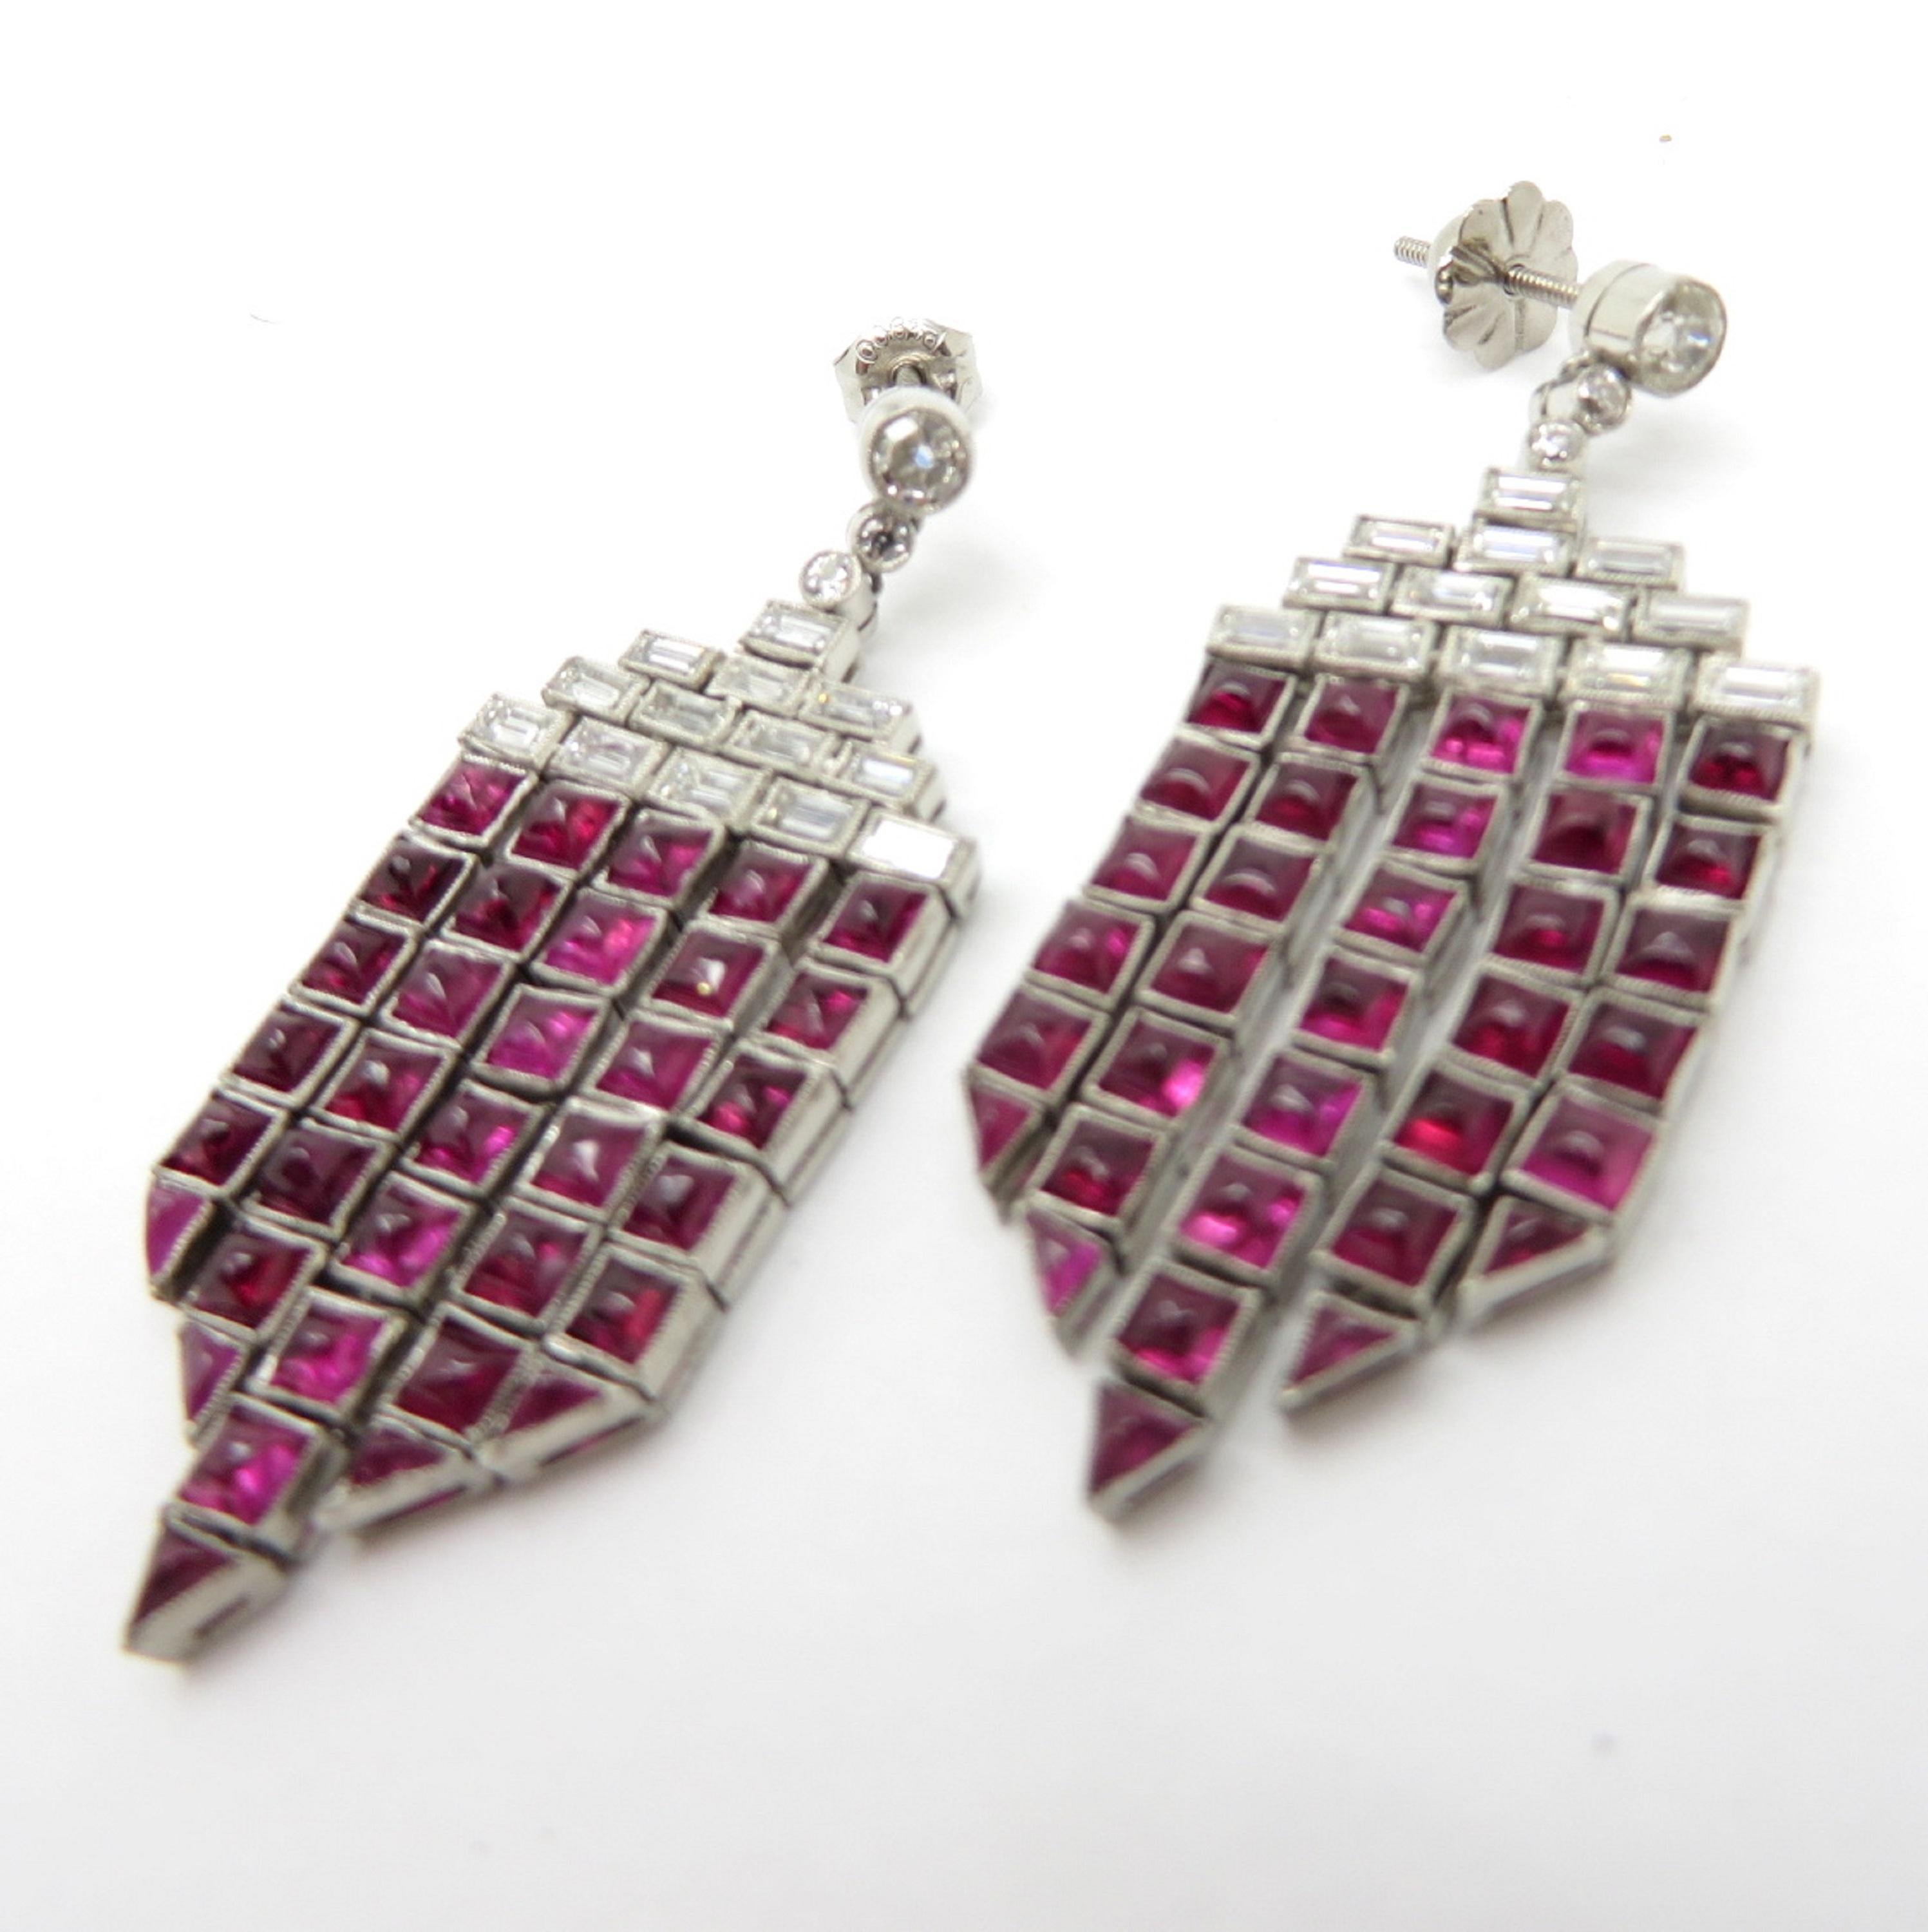 For sale is a stunning pair of Art Deco Platinum Earrings with Rubies and Diamonds!
Showcasing six (6) Old European Cut diamonds, with various measurements, having I-K Color Grade and SI1-SI2 Clarity Grade and twenty-six (26) Straight Baguette